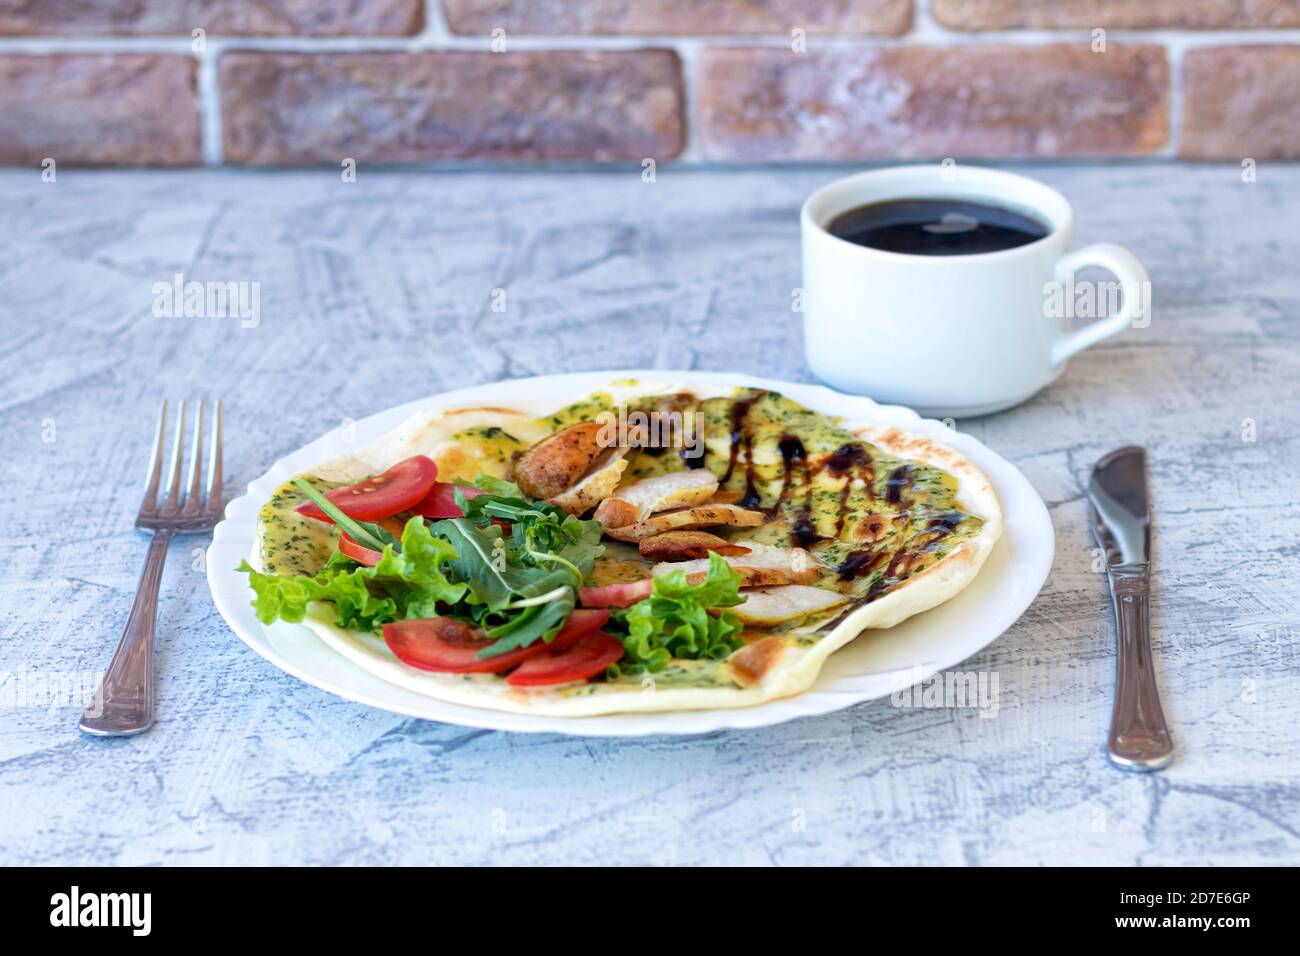 Italian breakfast with coffee. Piadina with grilled chicken, tomatoes, salad and arugula. Delicious breakfast served on table. Soft focus Stock Photo